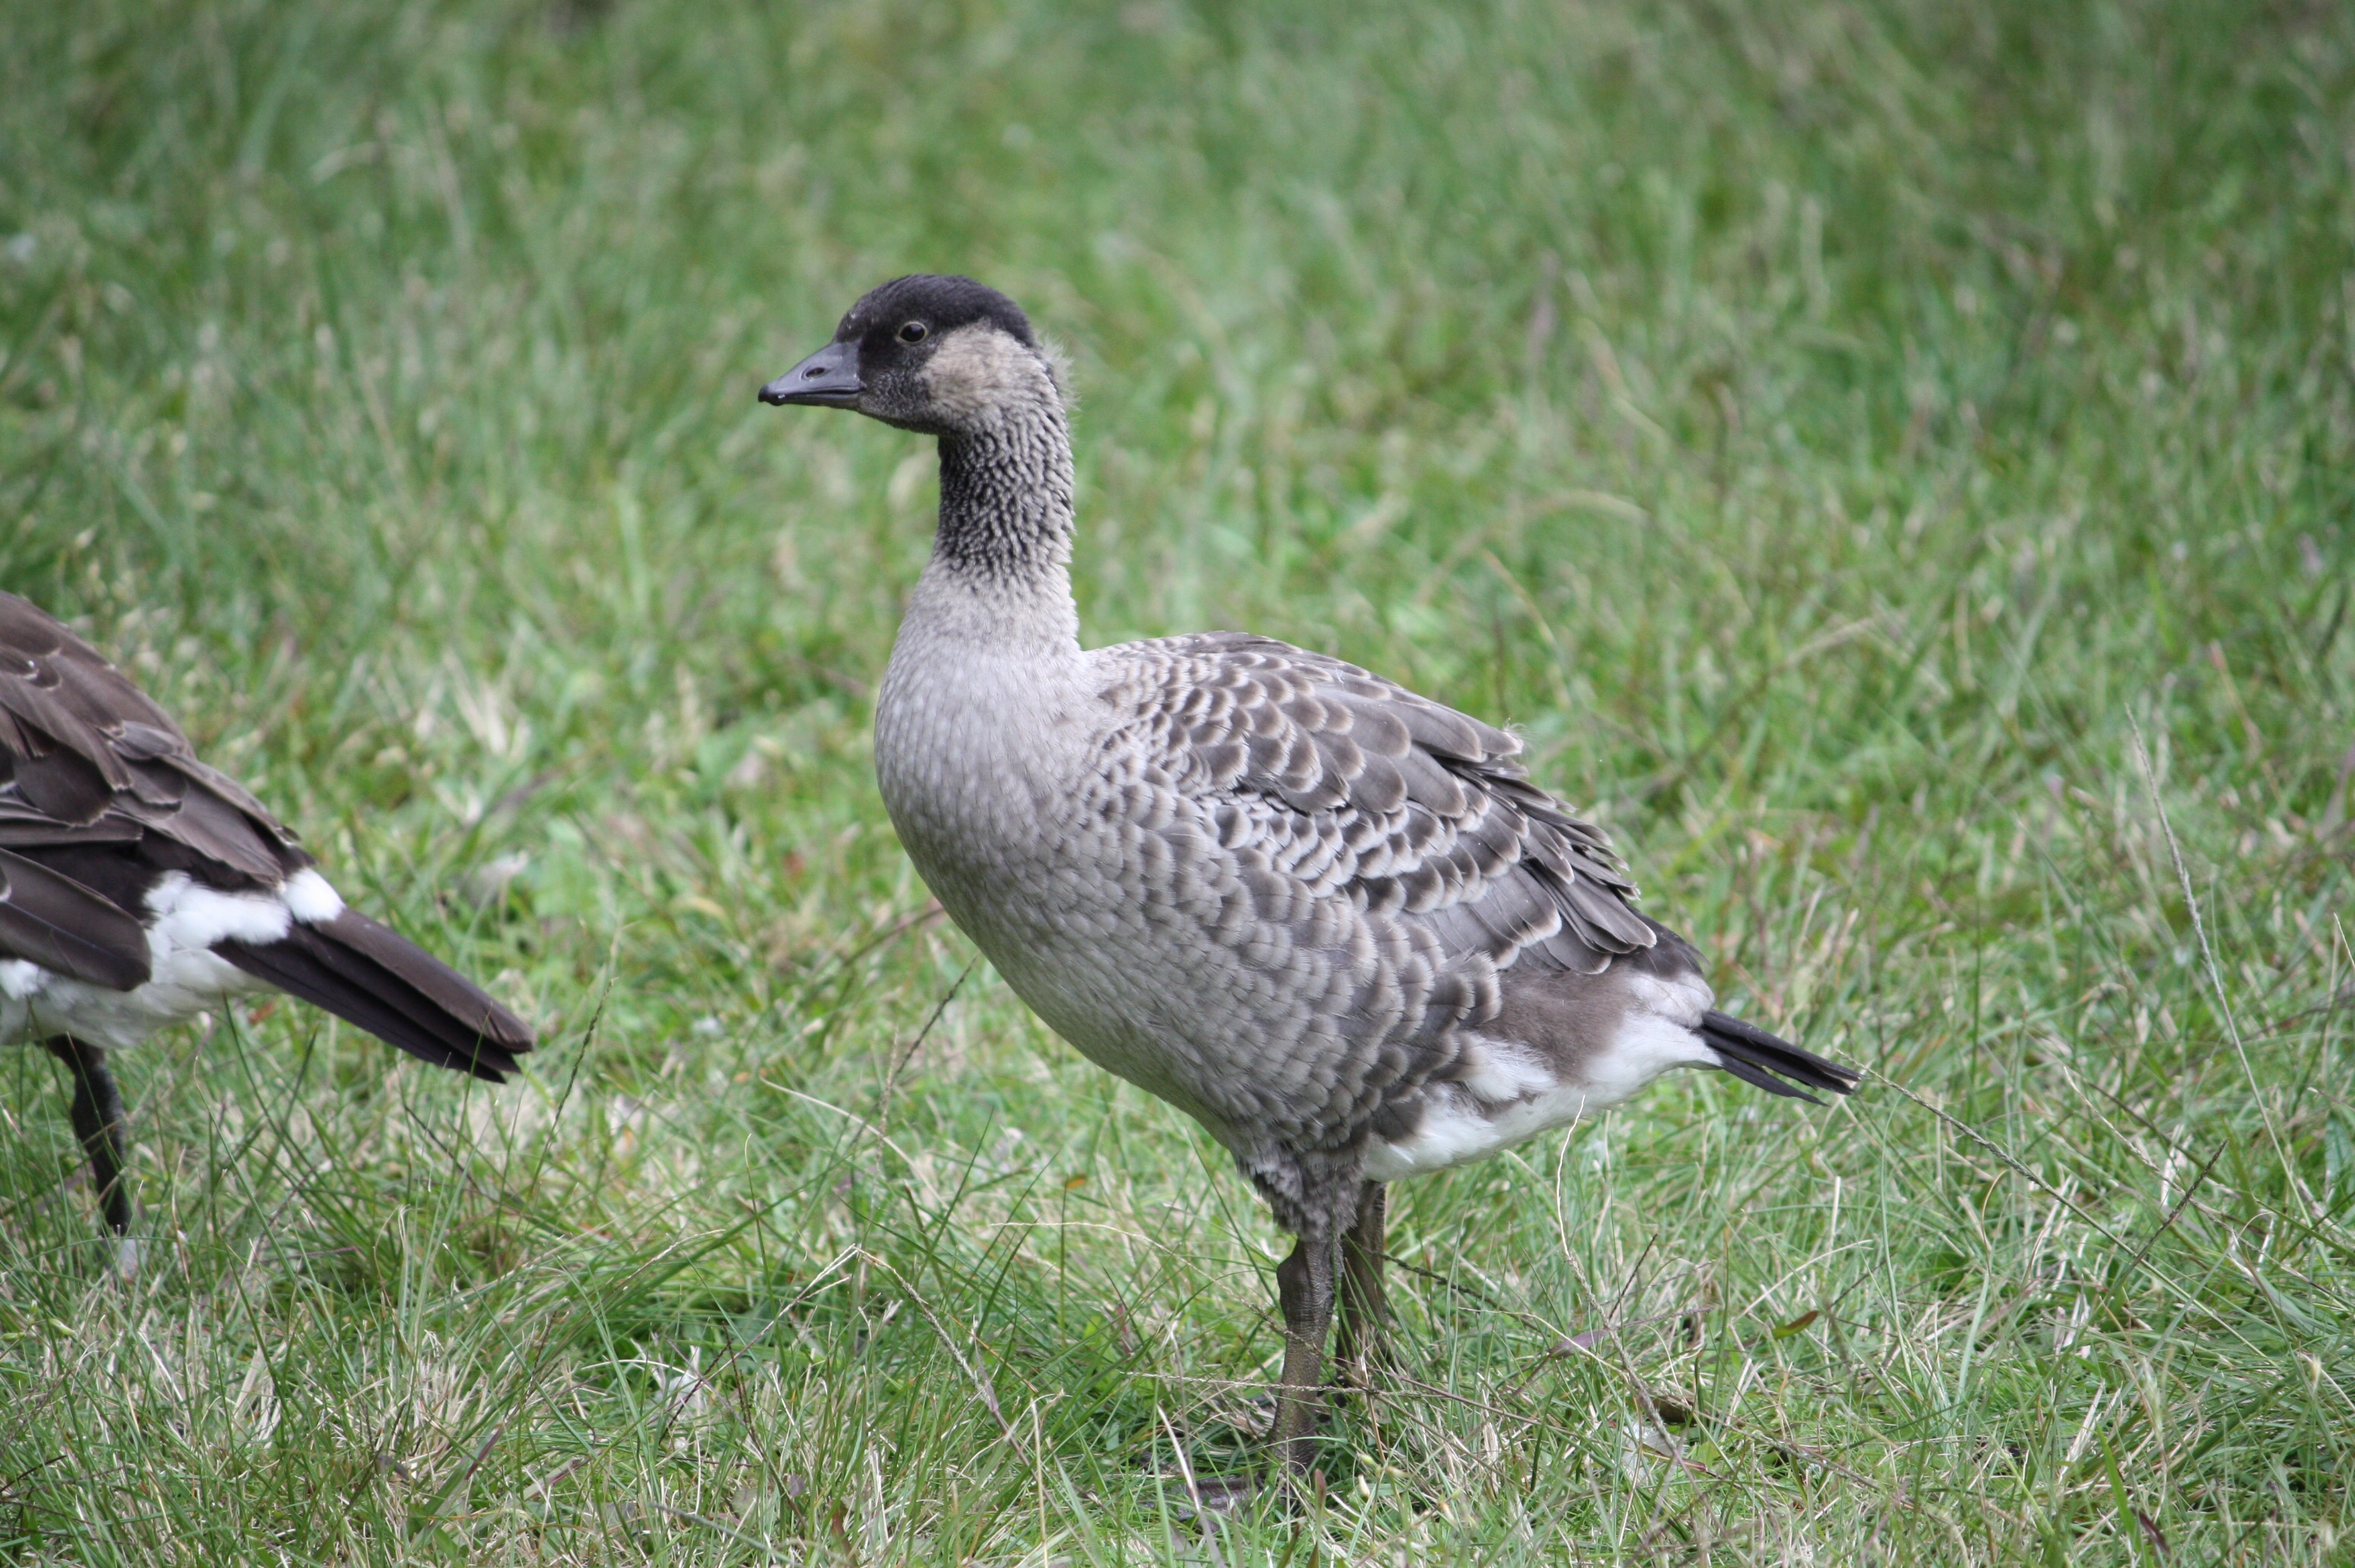 Young goose fledgling standing in grass